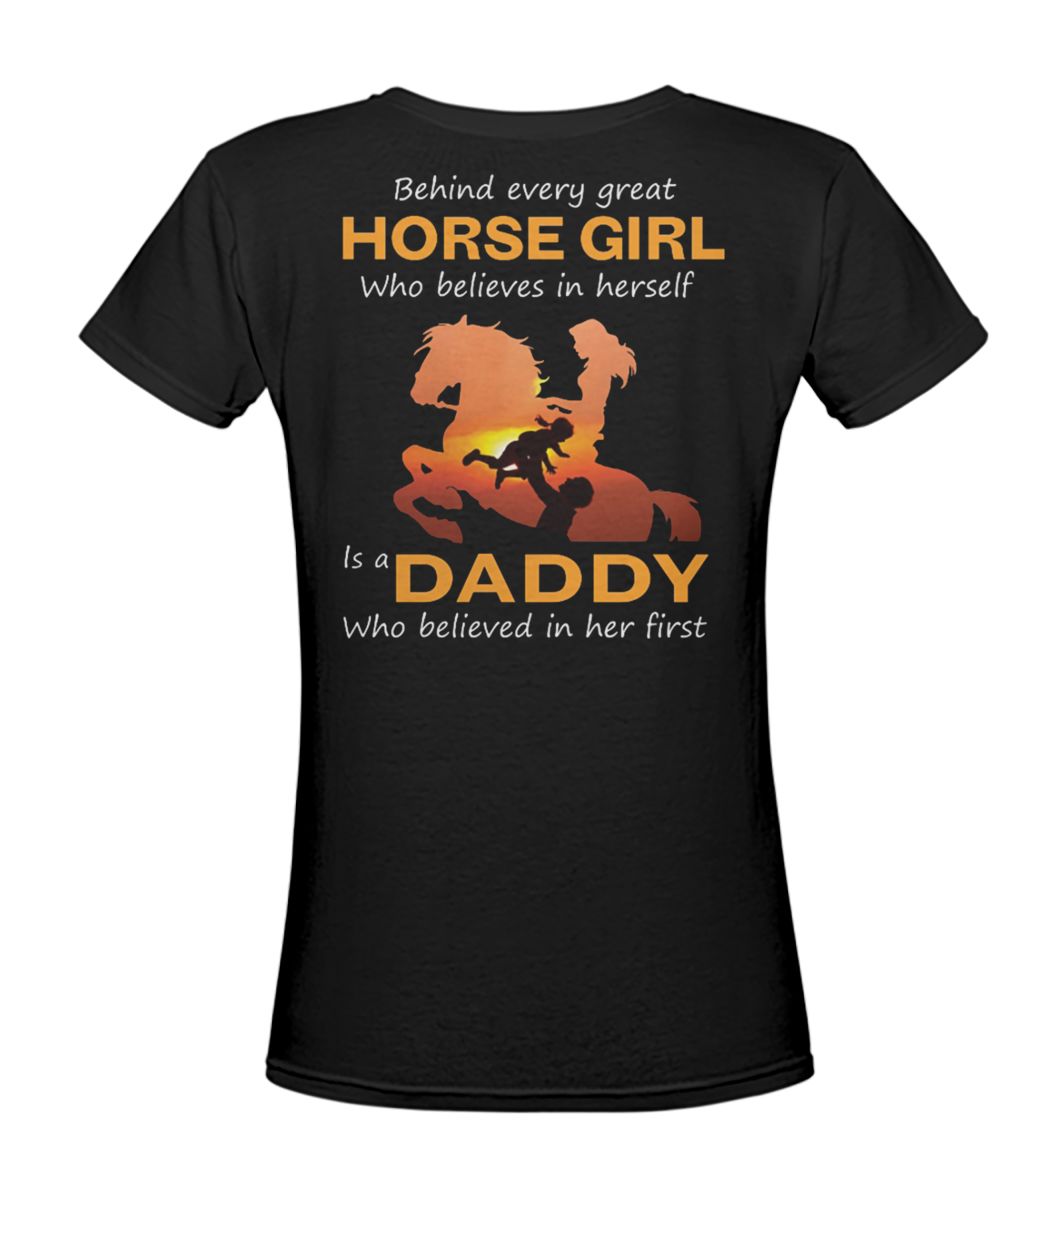 Behind every horse girl who believes in herself women's v-neck